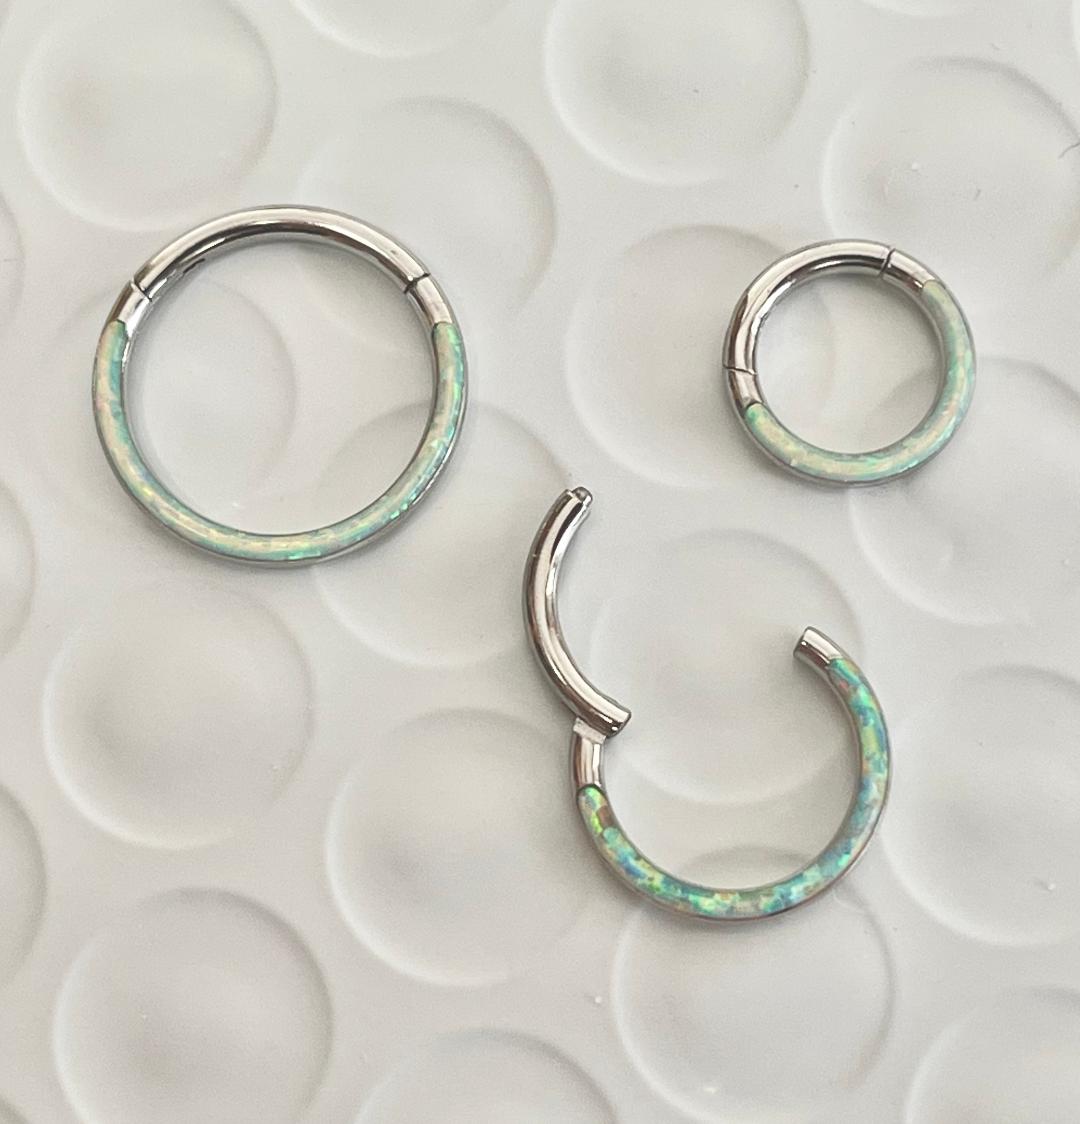 1pc Opal Front Edge Hinged Segment Ring Septum Clicker 316L Surgical Steel